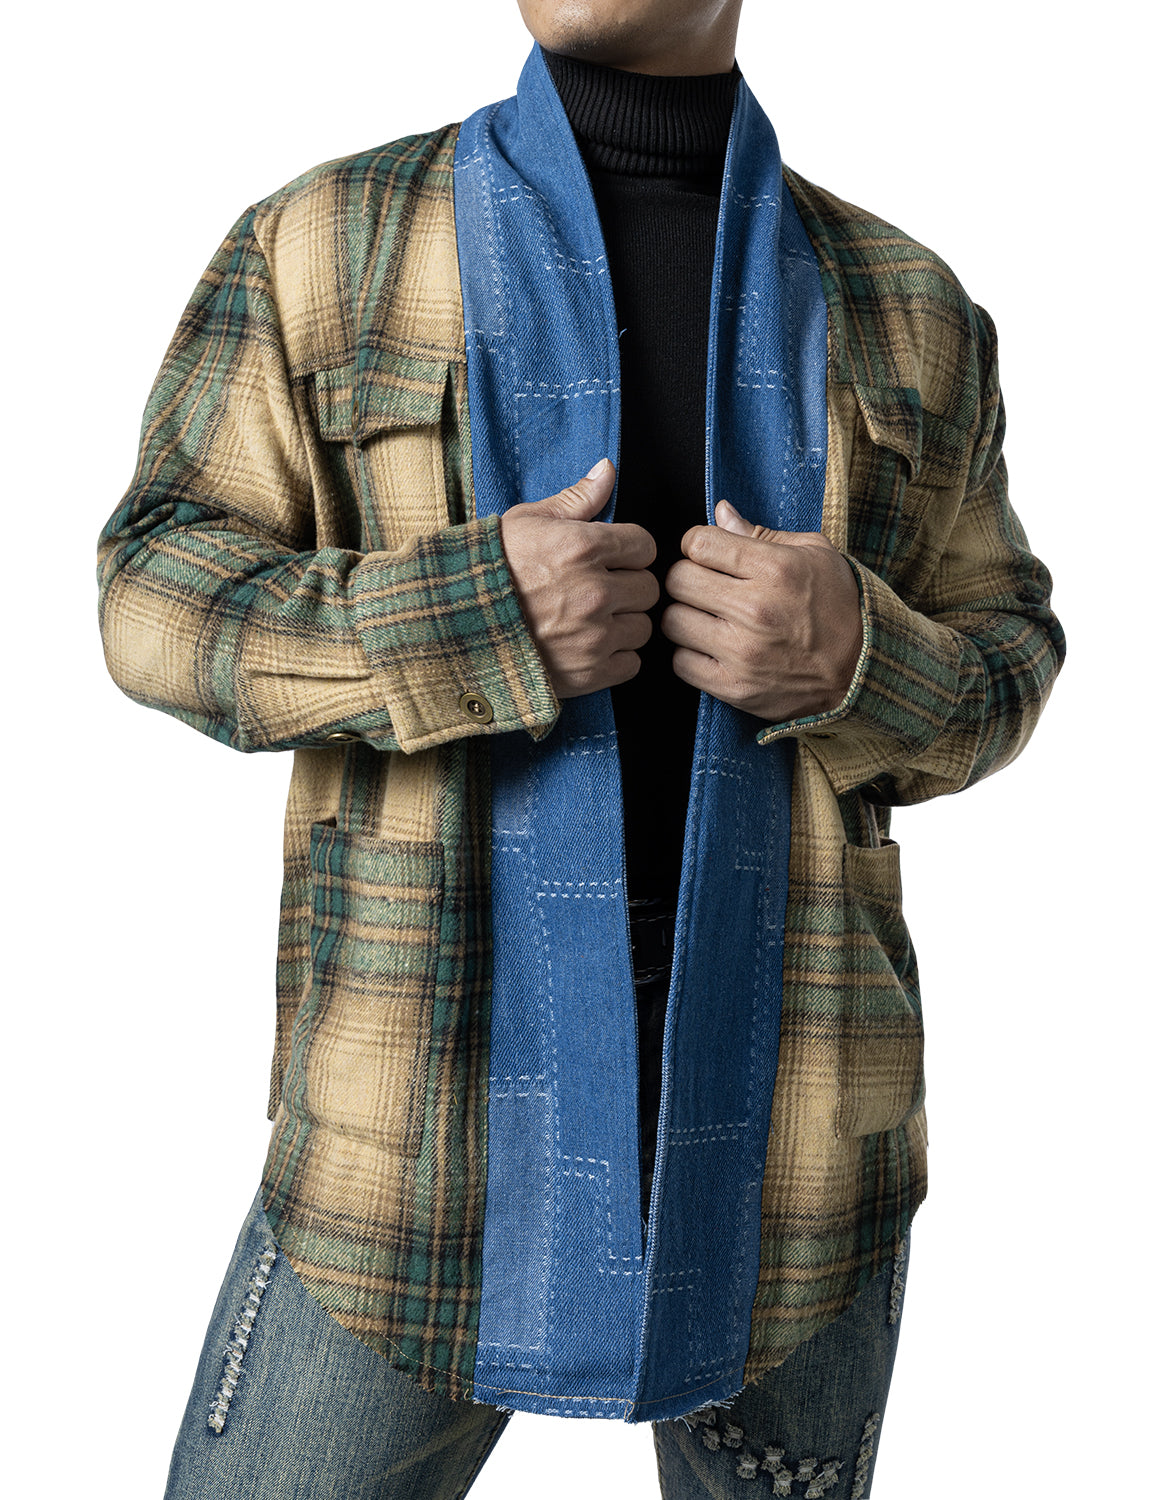 JOGAL Mens Flannel Plaid Shirt Jacket Long Sleeve Casual Open Front Outwear with Pockets